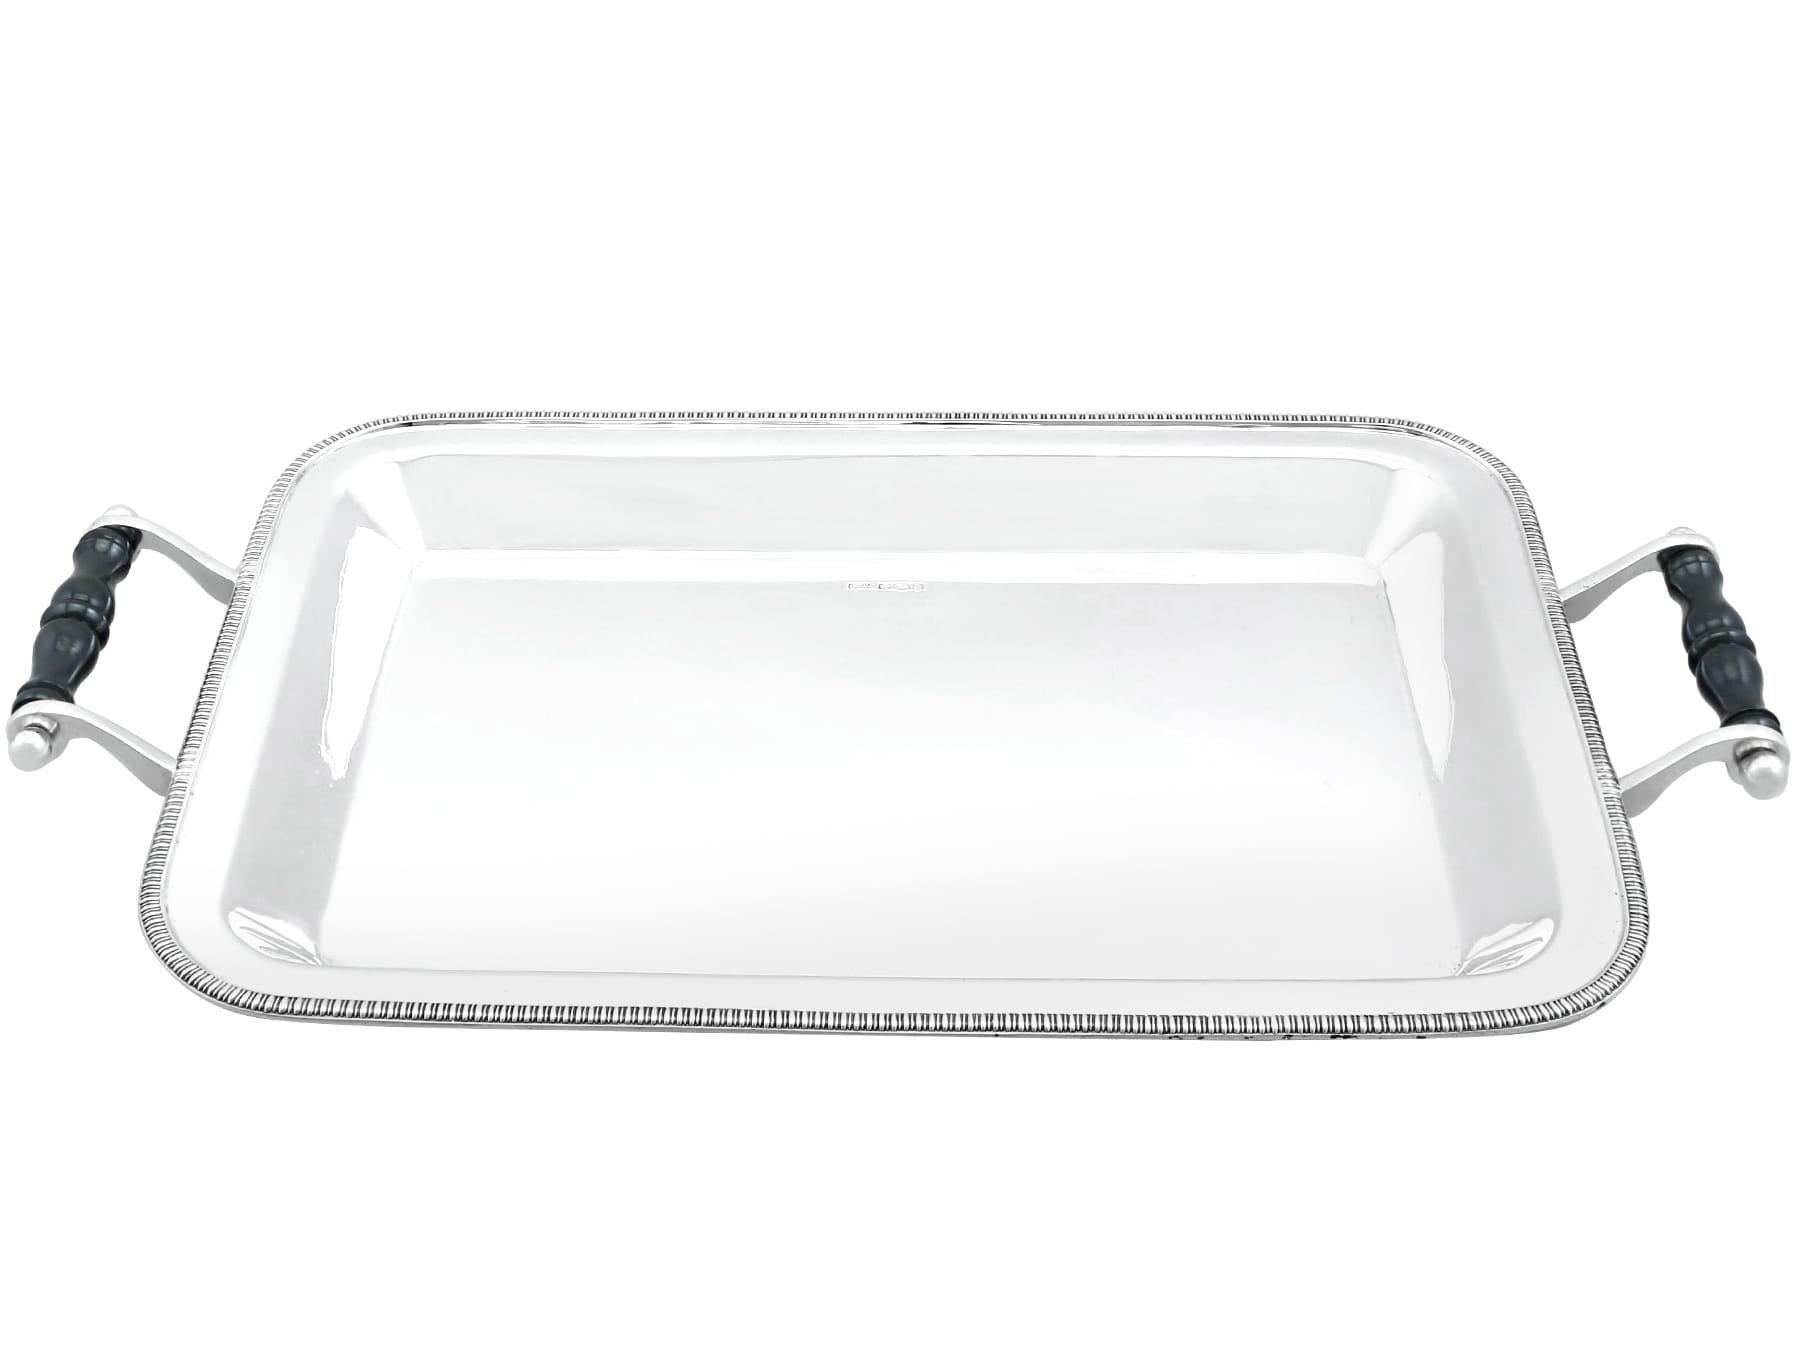 An exceptional, fine and impressive antique George V English sterling silver drinks tray; an addition to our ornamental silverware collection

This exceptional antique George V sterling silver drinks tray has a rectangular form with rounded